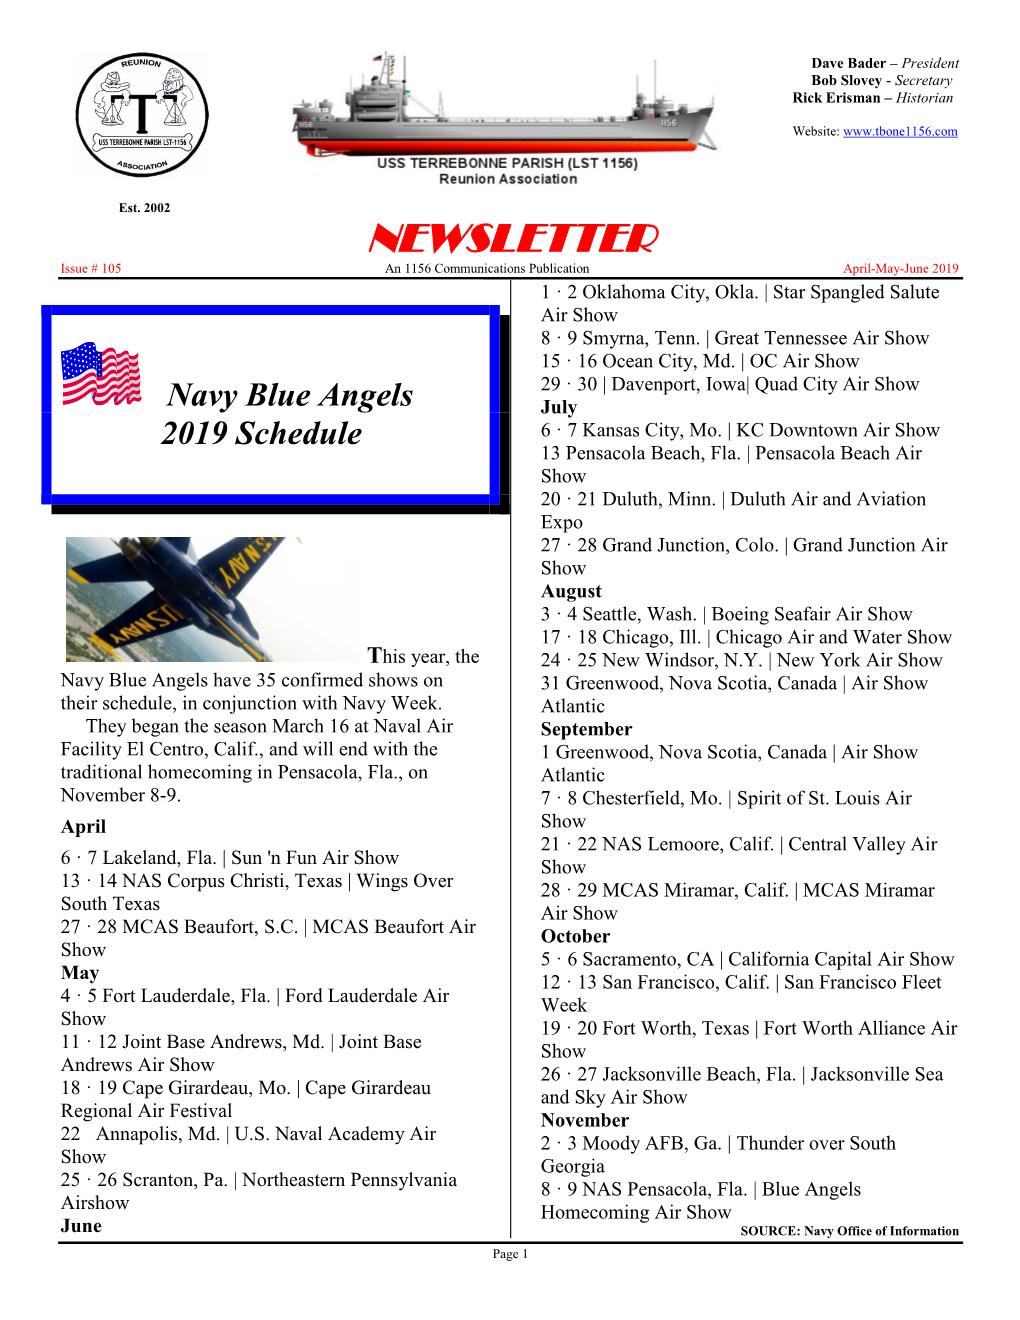 Newsletter Issue 105 2019 April May June